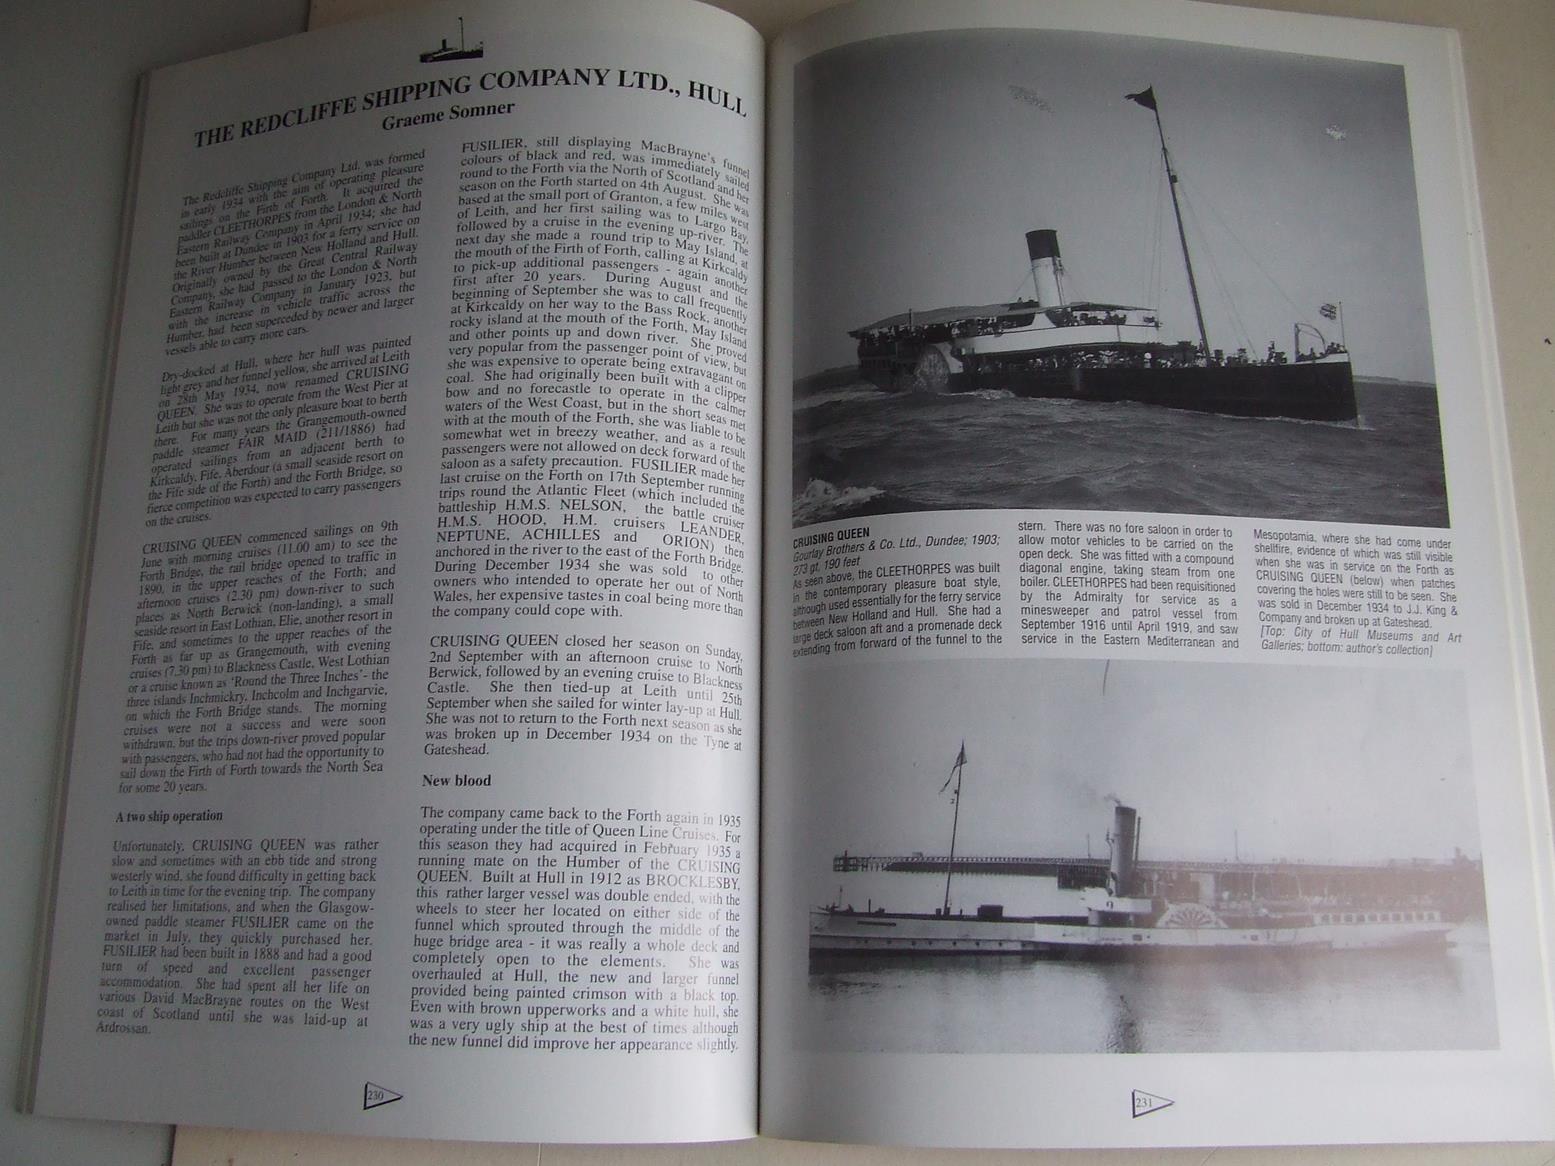 Ships in Focus Record issue number 4, volume 1